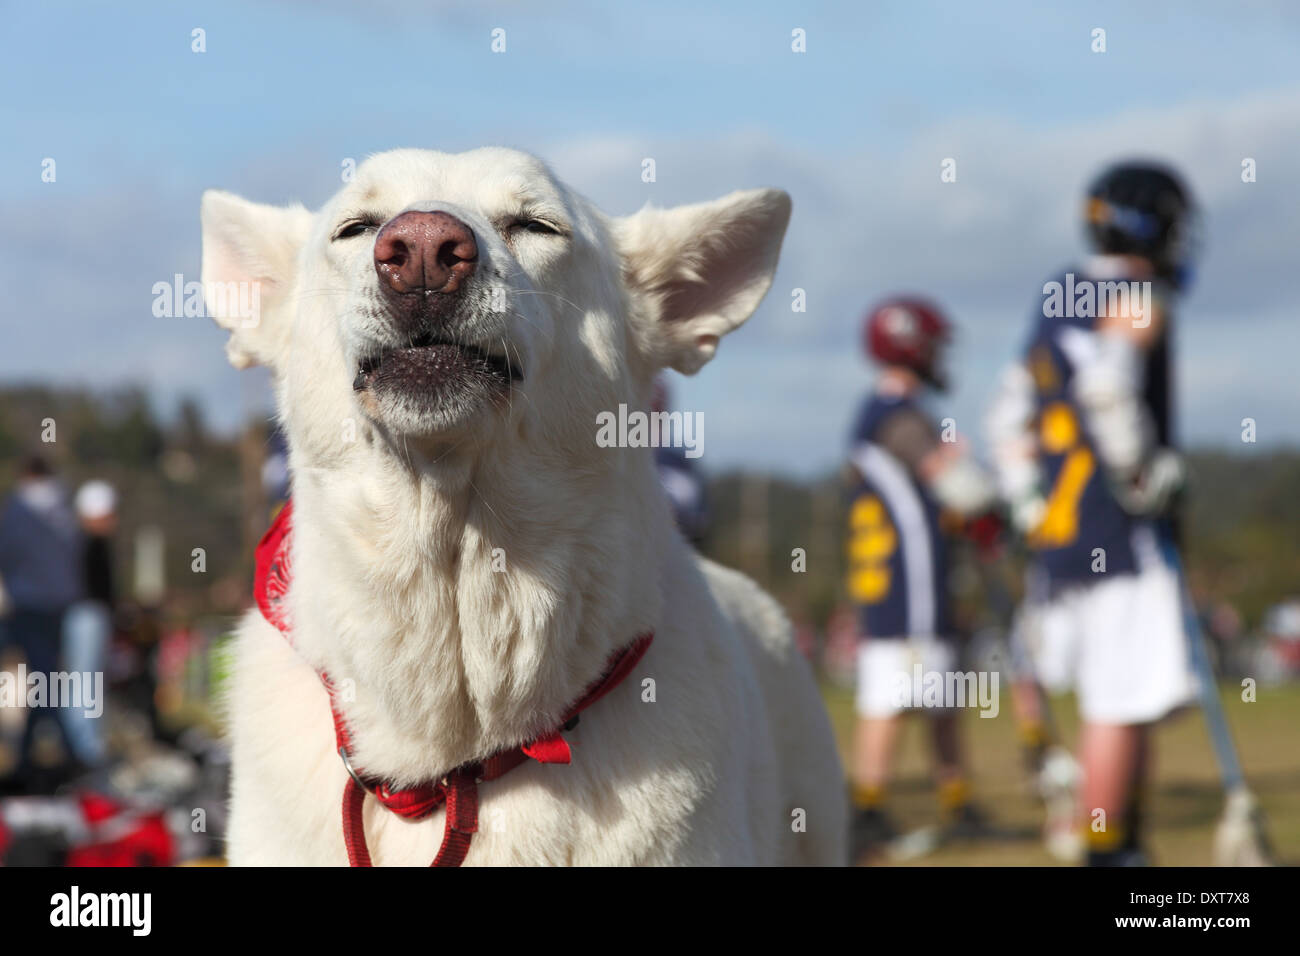 Dog appears to be cheering on lacrosse players Stock Photo